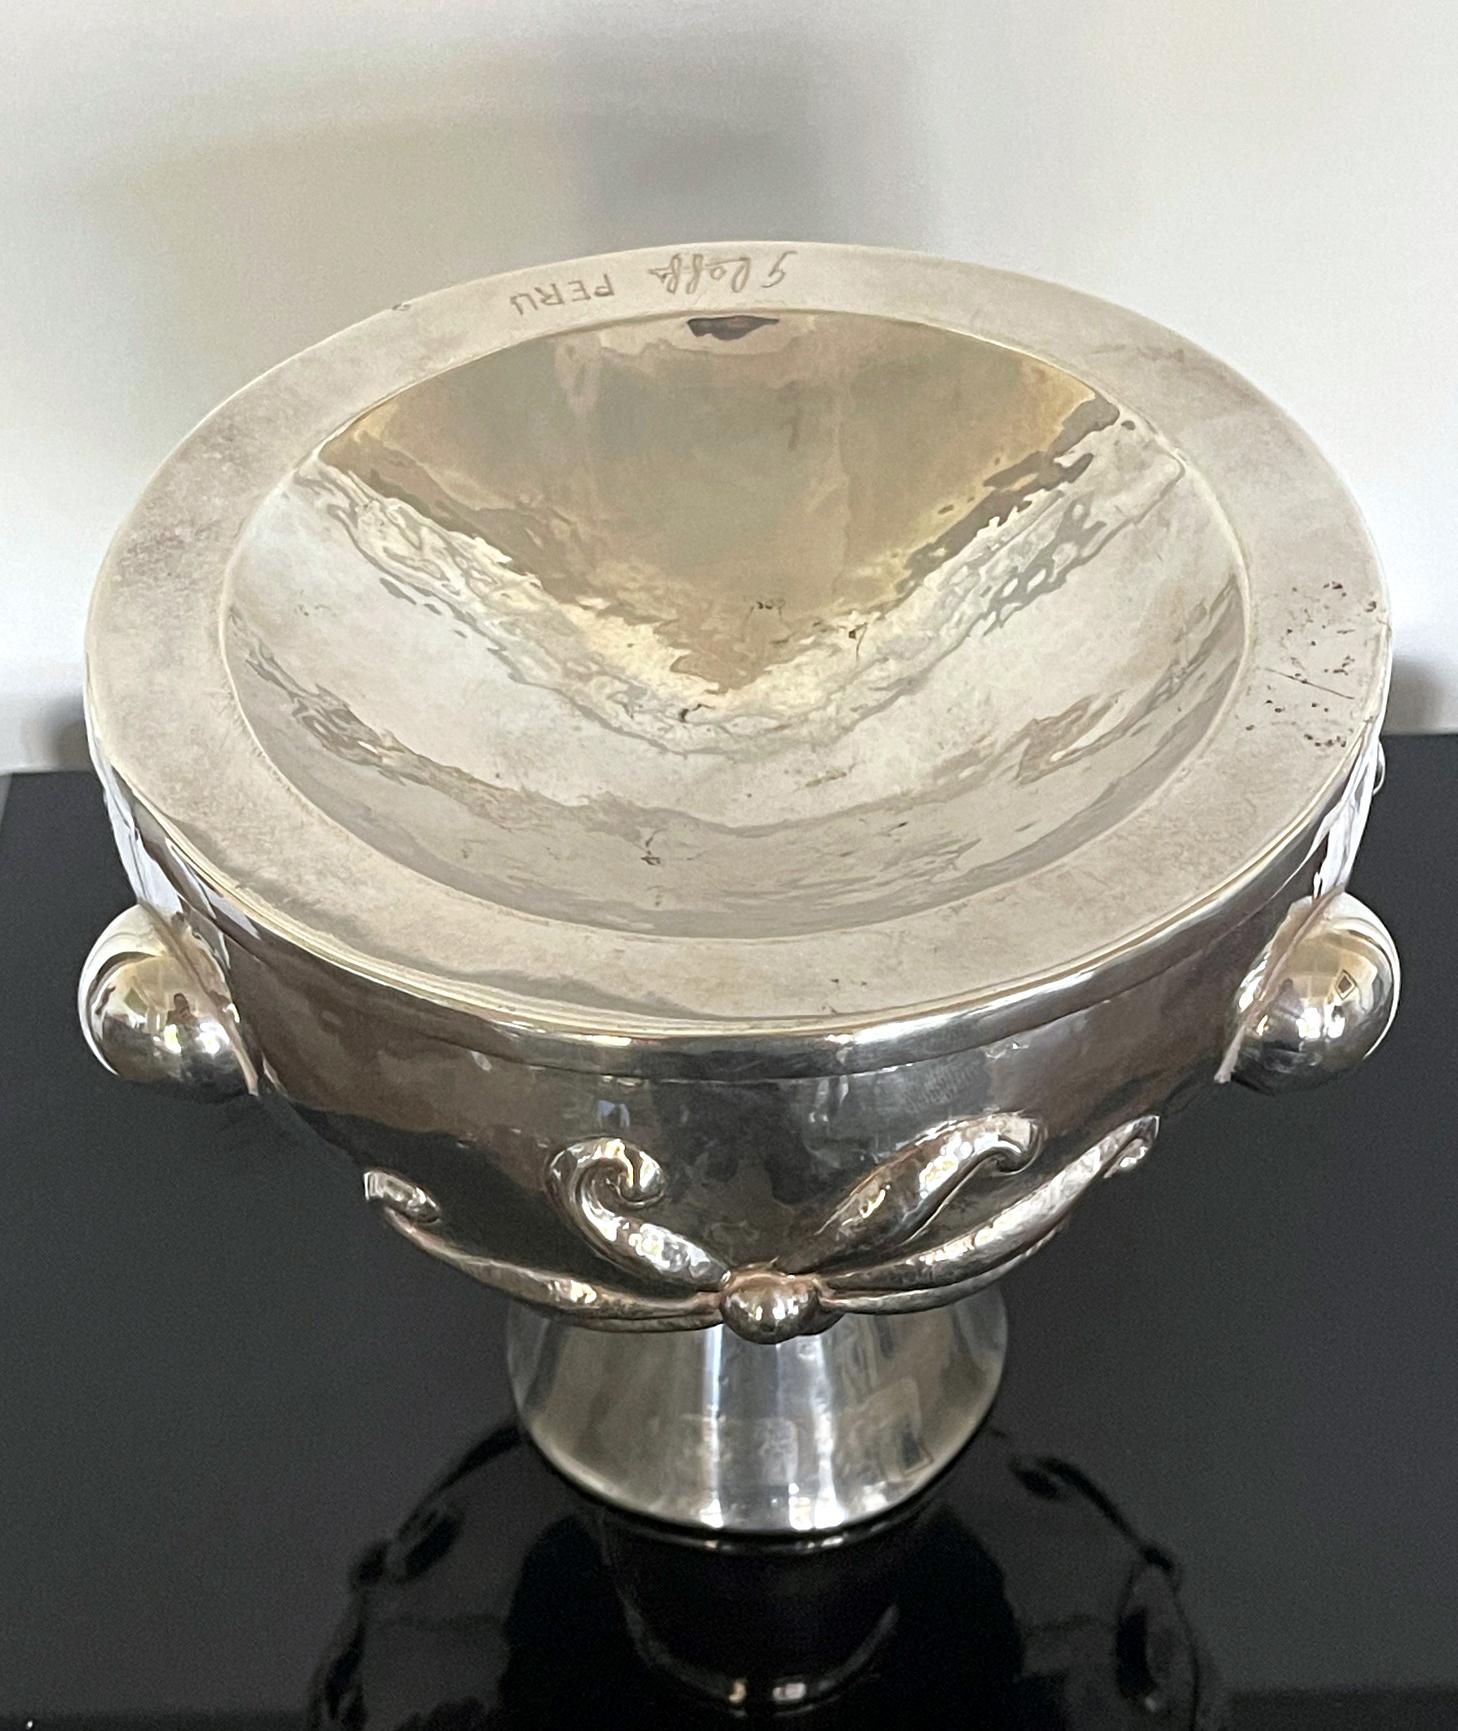 Mid-20th Century Sculptural Silver Center Bowl with Relief Surface Graziella Laffi For Sale